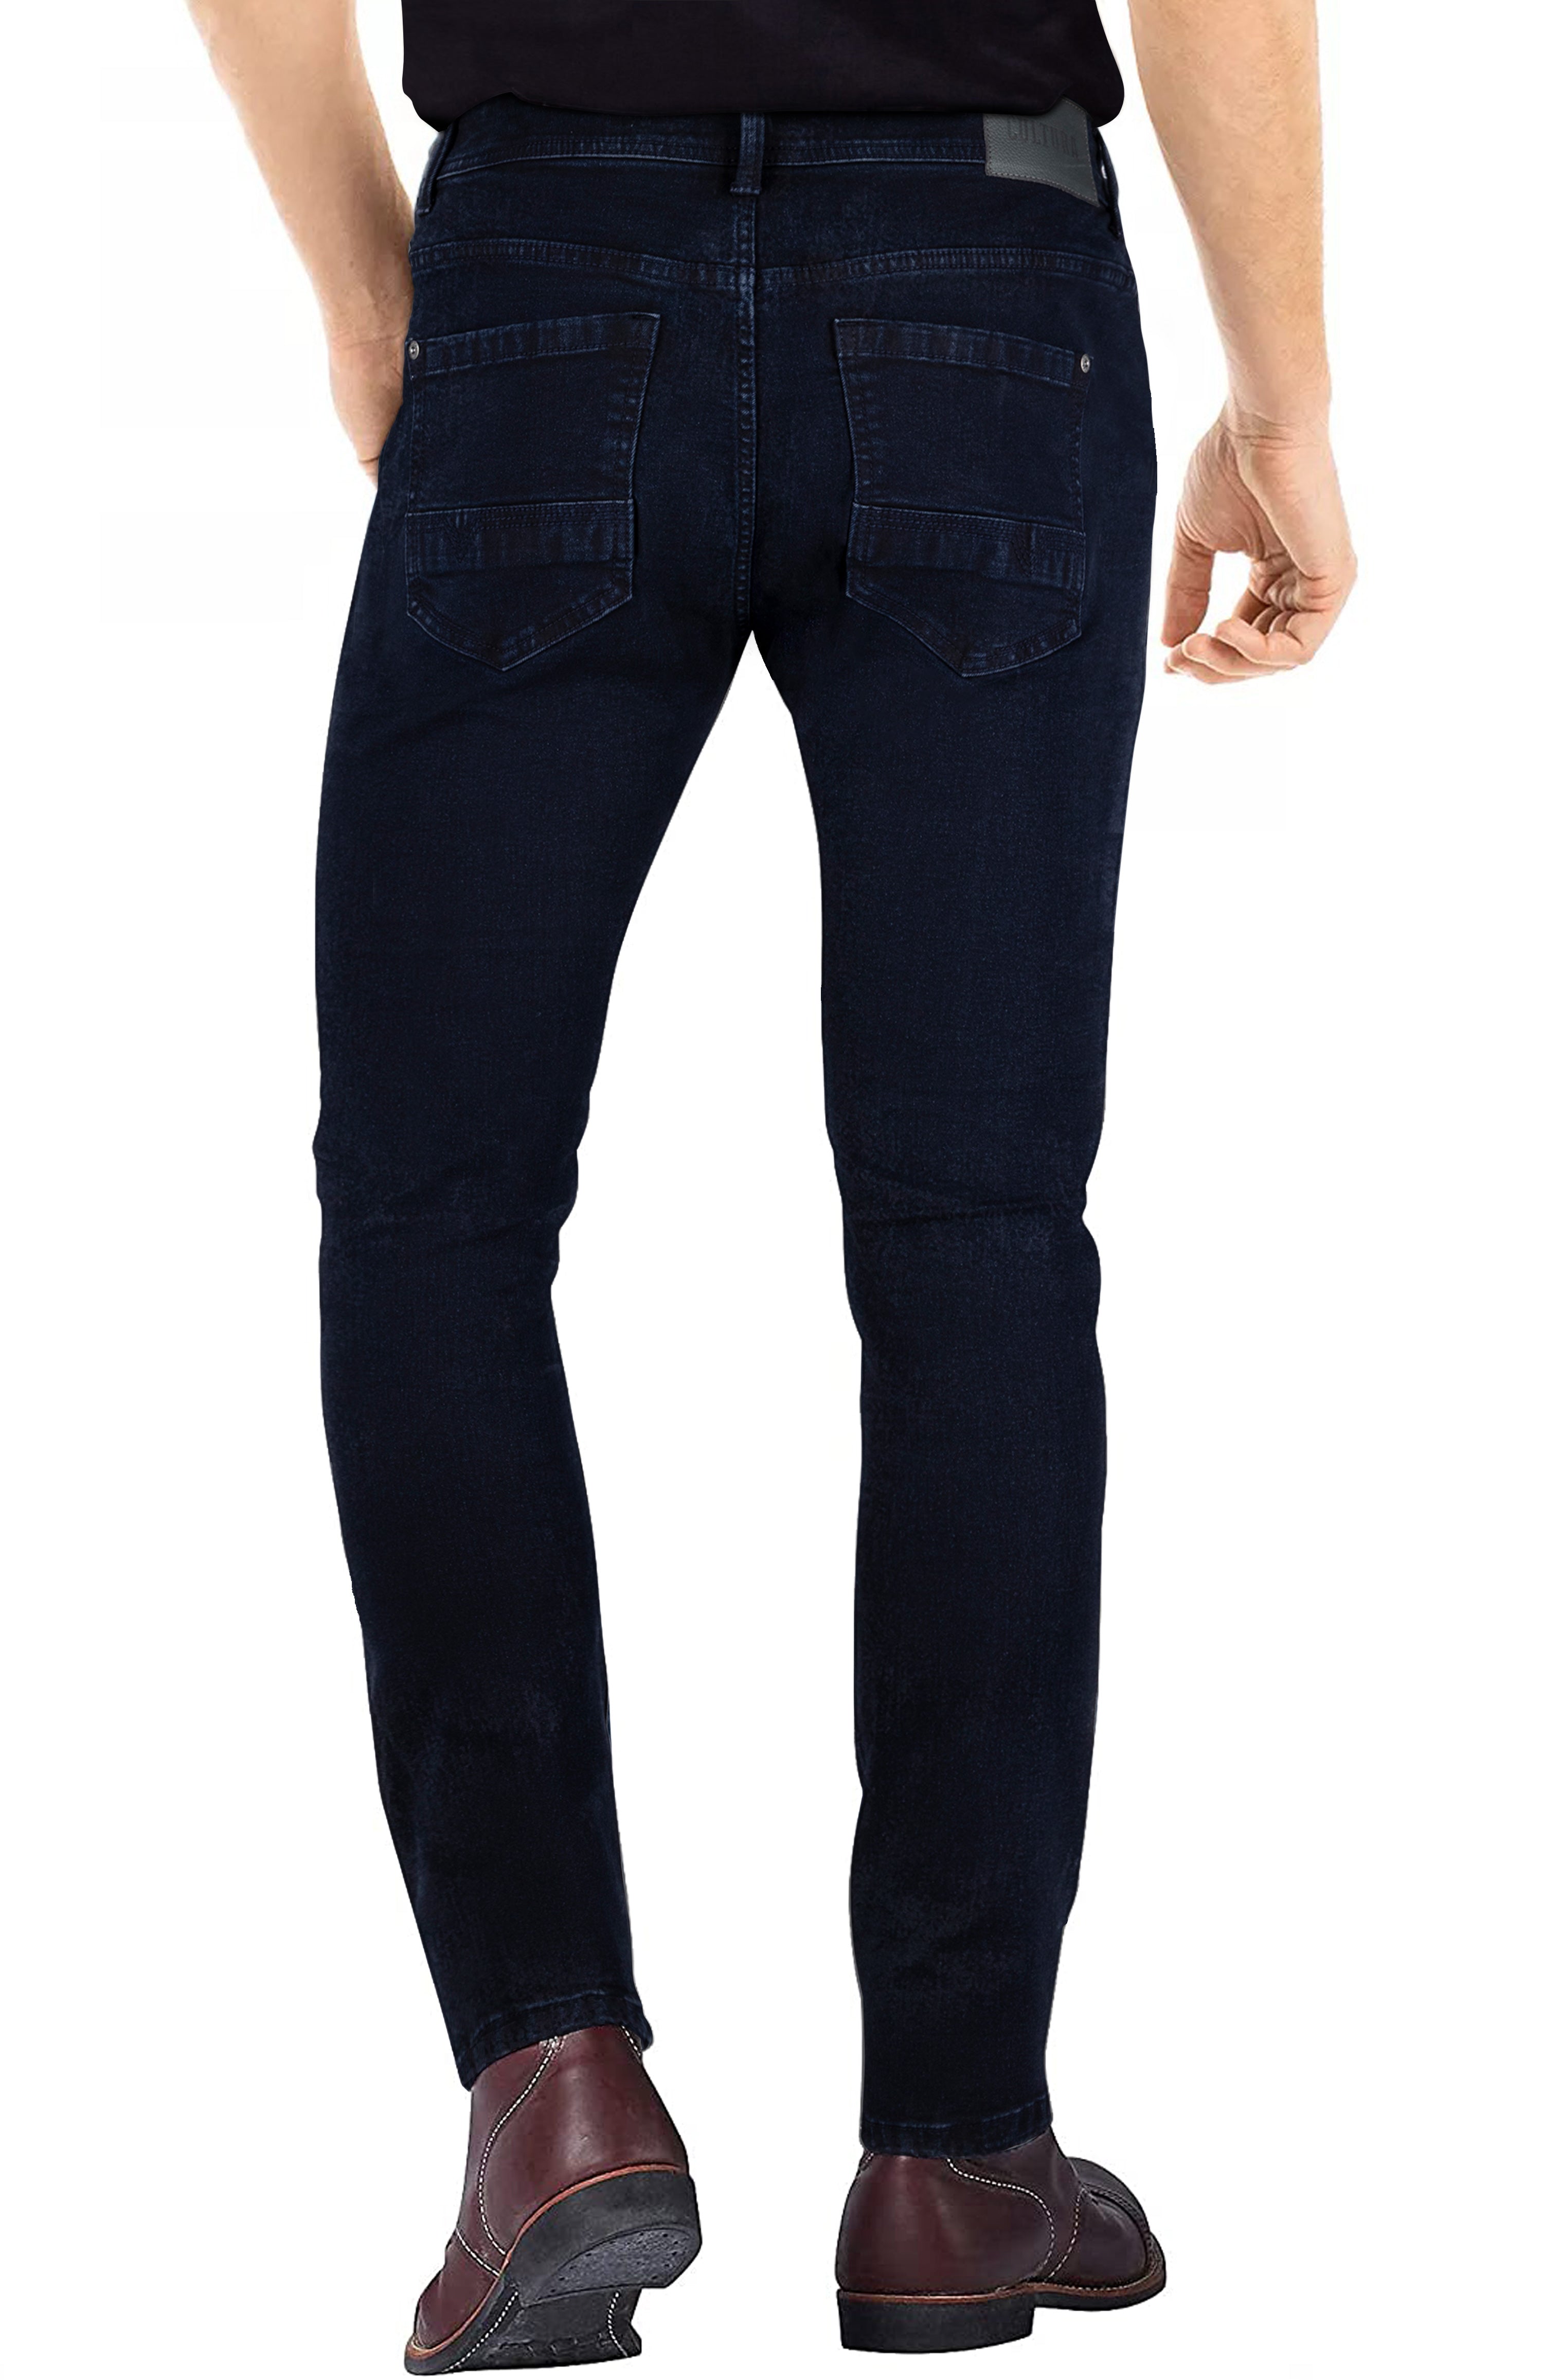 CULTURA AZURE Skinny for – X-RAY JEANS fit Men Stretch Jeans